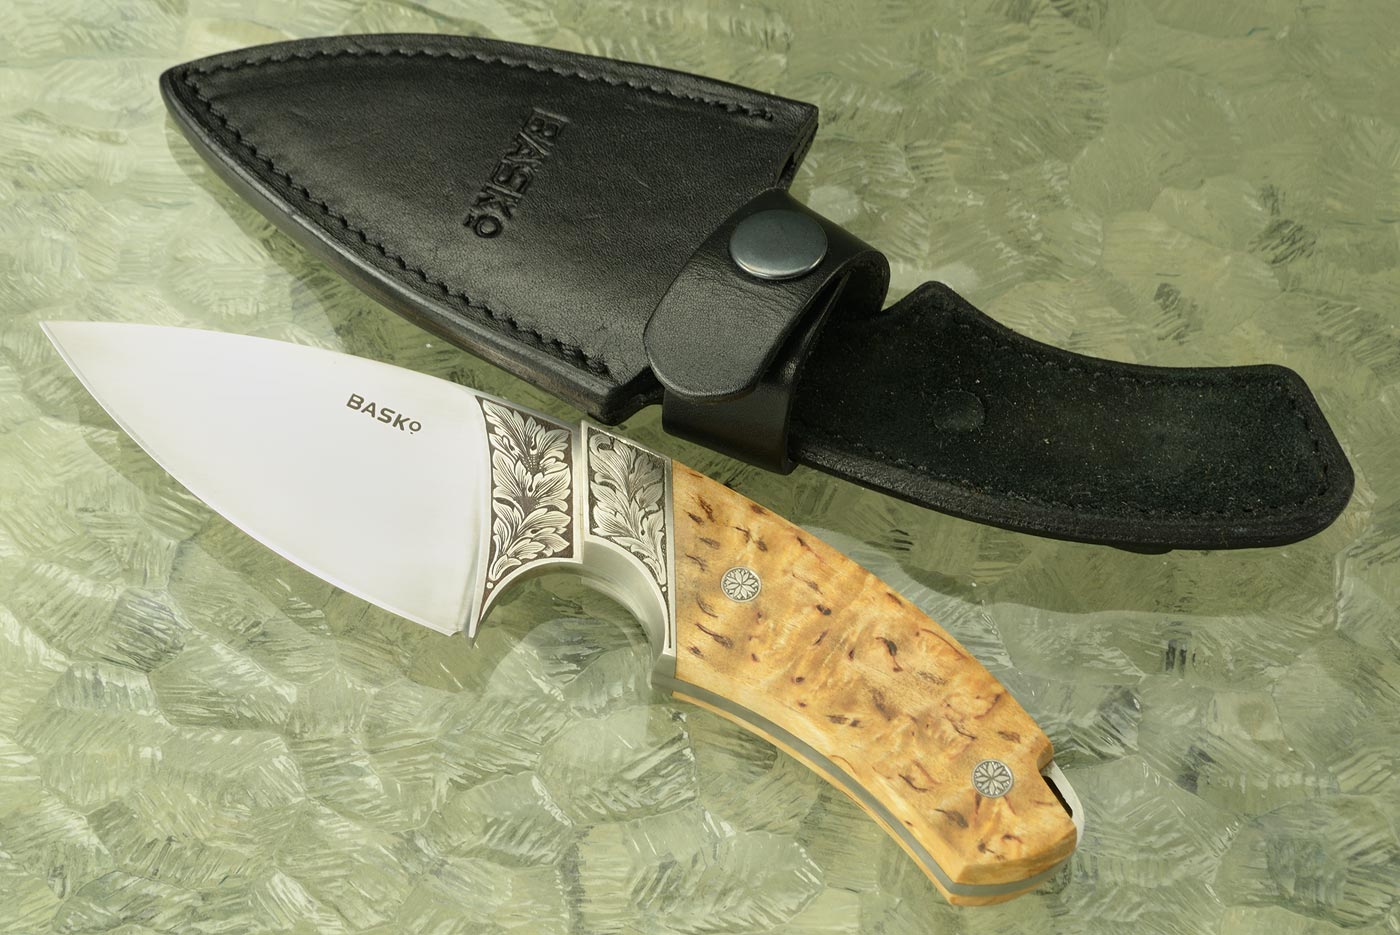 Engraved Fang Lux with Karelian Birch